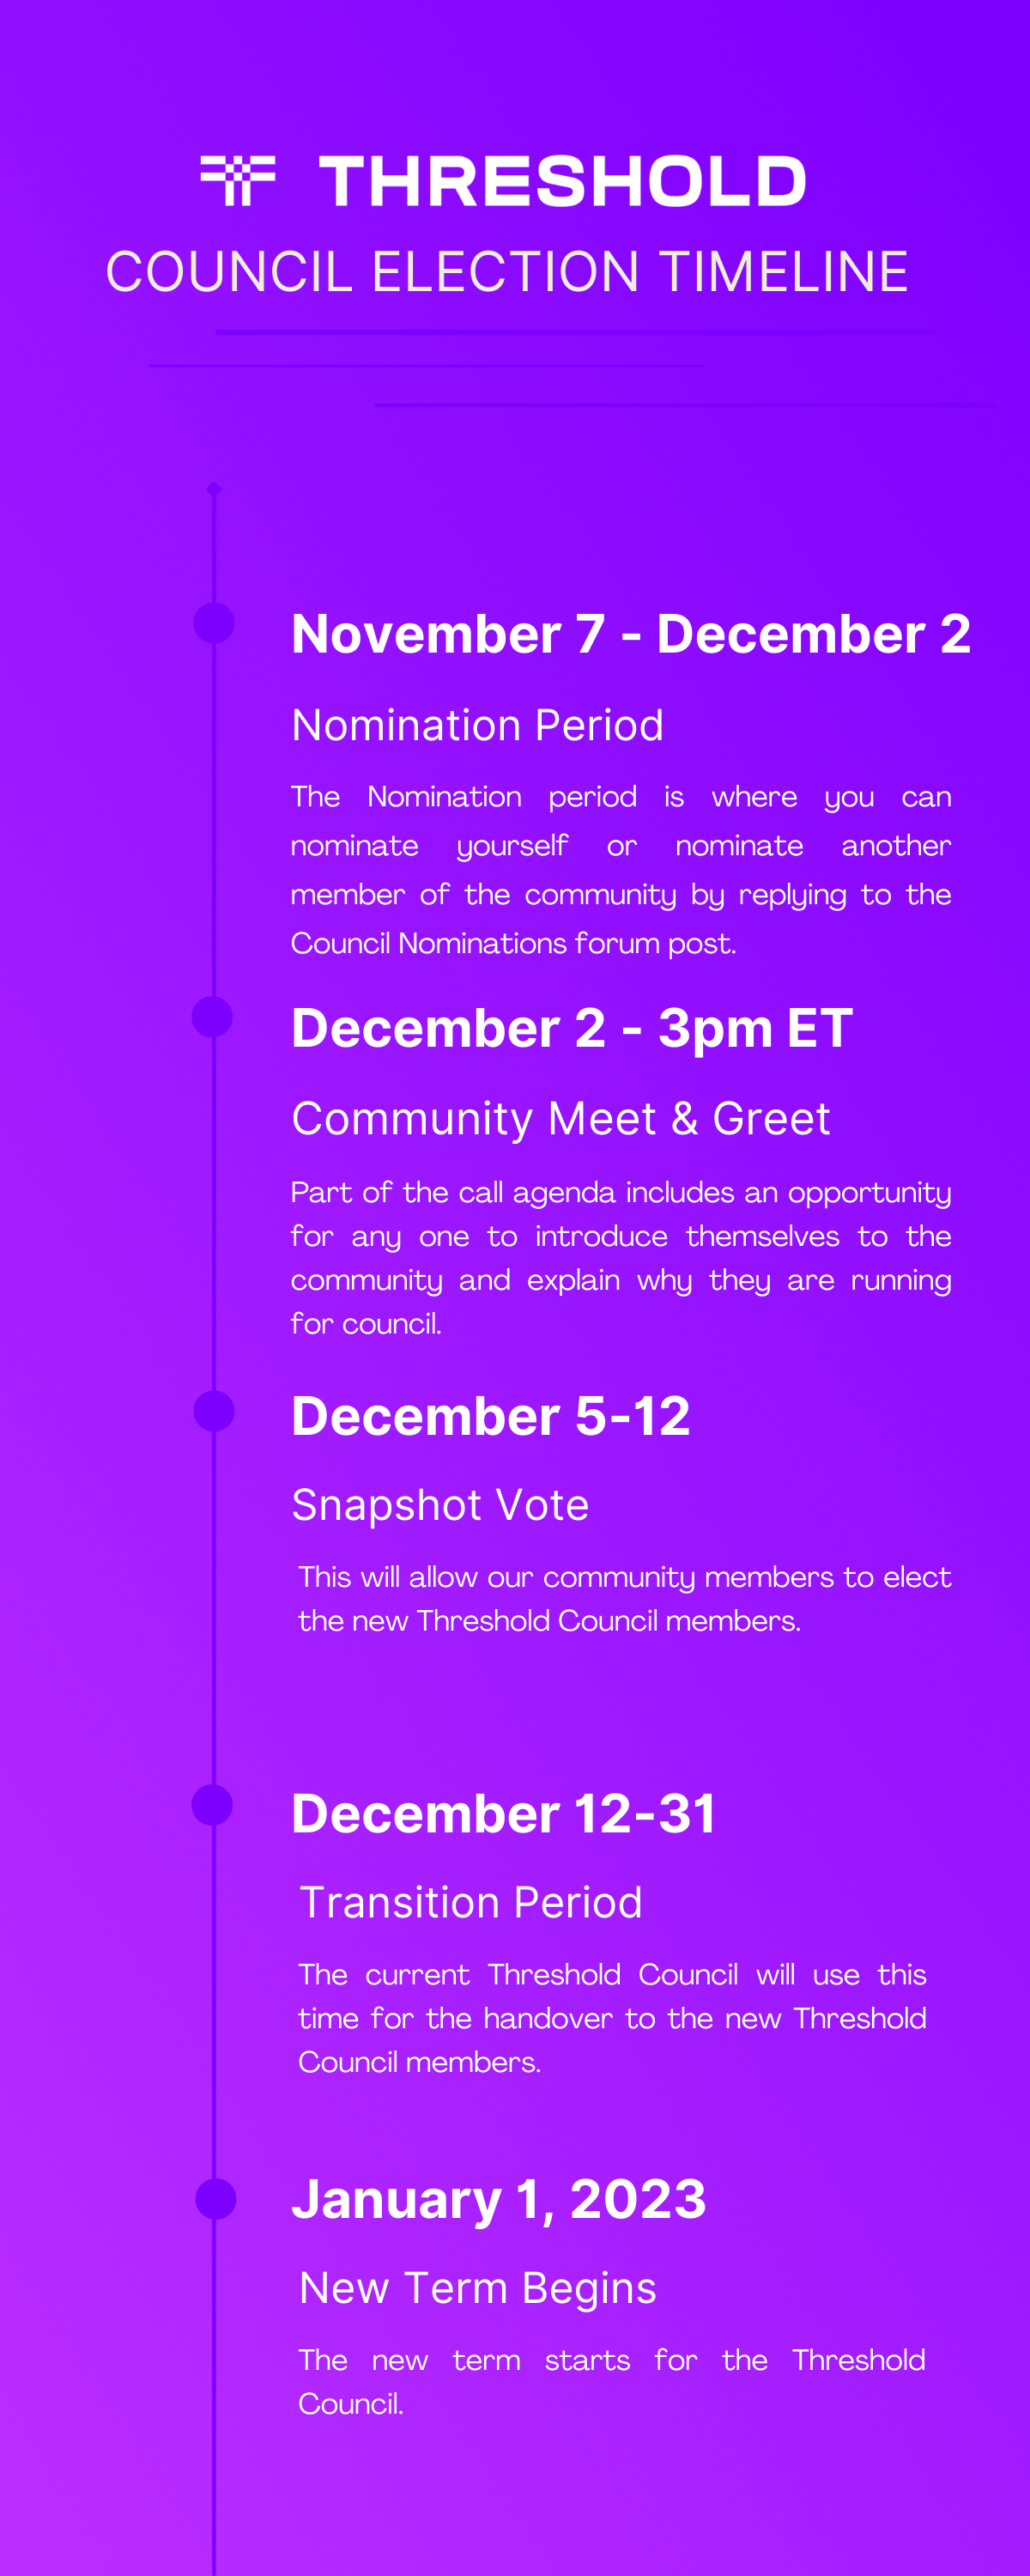 November 7th to December 2nd - Nomination period, where you can nominate yourself or nominate another member of the community by replying to this forum post. The nomination post can include a quick introduction, your involvement in our community so far, other relevant web3 background info and reasons why you want to participate in the Threshold Council. Self-nominations are preferred for this, however, if you intend to nominate another member of the DAO, please consult them privately first to verify their intent to run. A person who is nominated by another member must confirm their intent to be a candidate. December 2nd, 3pm ET - Community Call to meet our delegates. Part of the call agenda includes an opportunity for any one to introduce themselves to the community and explain why they are running for council. December 5th - December 12th - Snapshot vote. This will allow our community members to elect the new Threshold Council members. December 12th - December 31st - Transition period. The current Threshold Council will use this time for the handover to the new Threshold Council members. January 1st, 2023 - The new term starts for the Threshold Council.